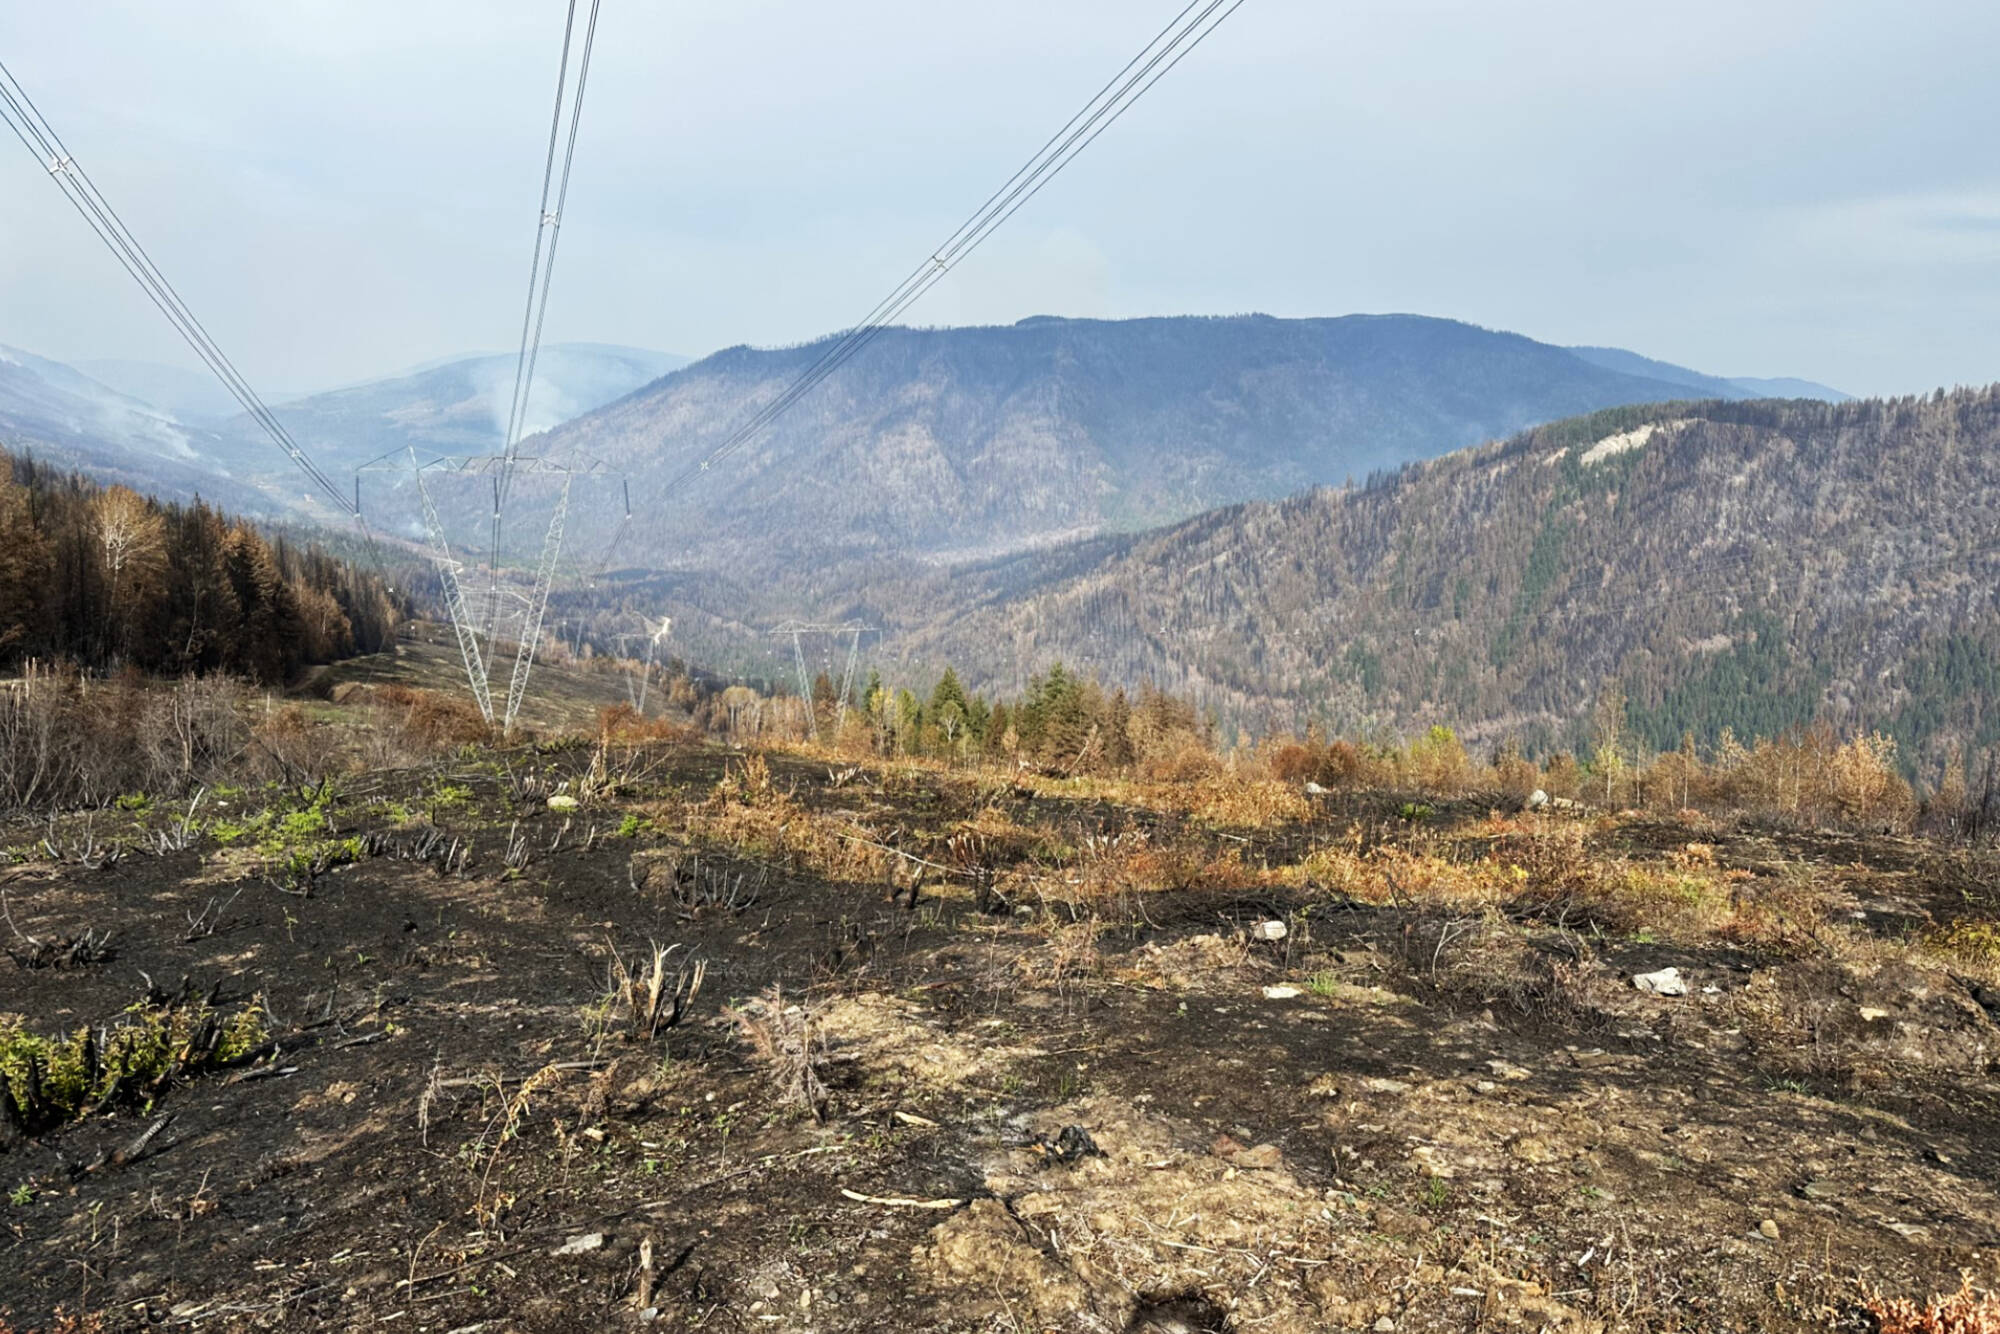 On Aug. 17, BC Wildfire Service conducted a planned aerial ignition along a power line southeast of the Lower East Adams Lake wildfire to prevent the fire’s spread to North Shuswap communities. (Jim Cooperman photo)